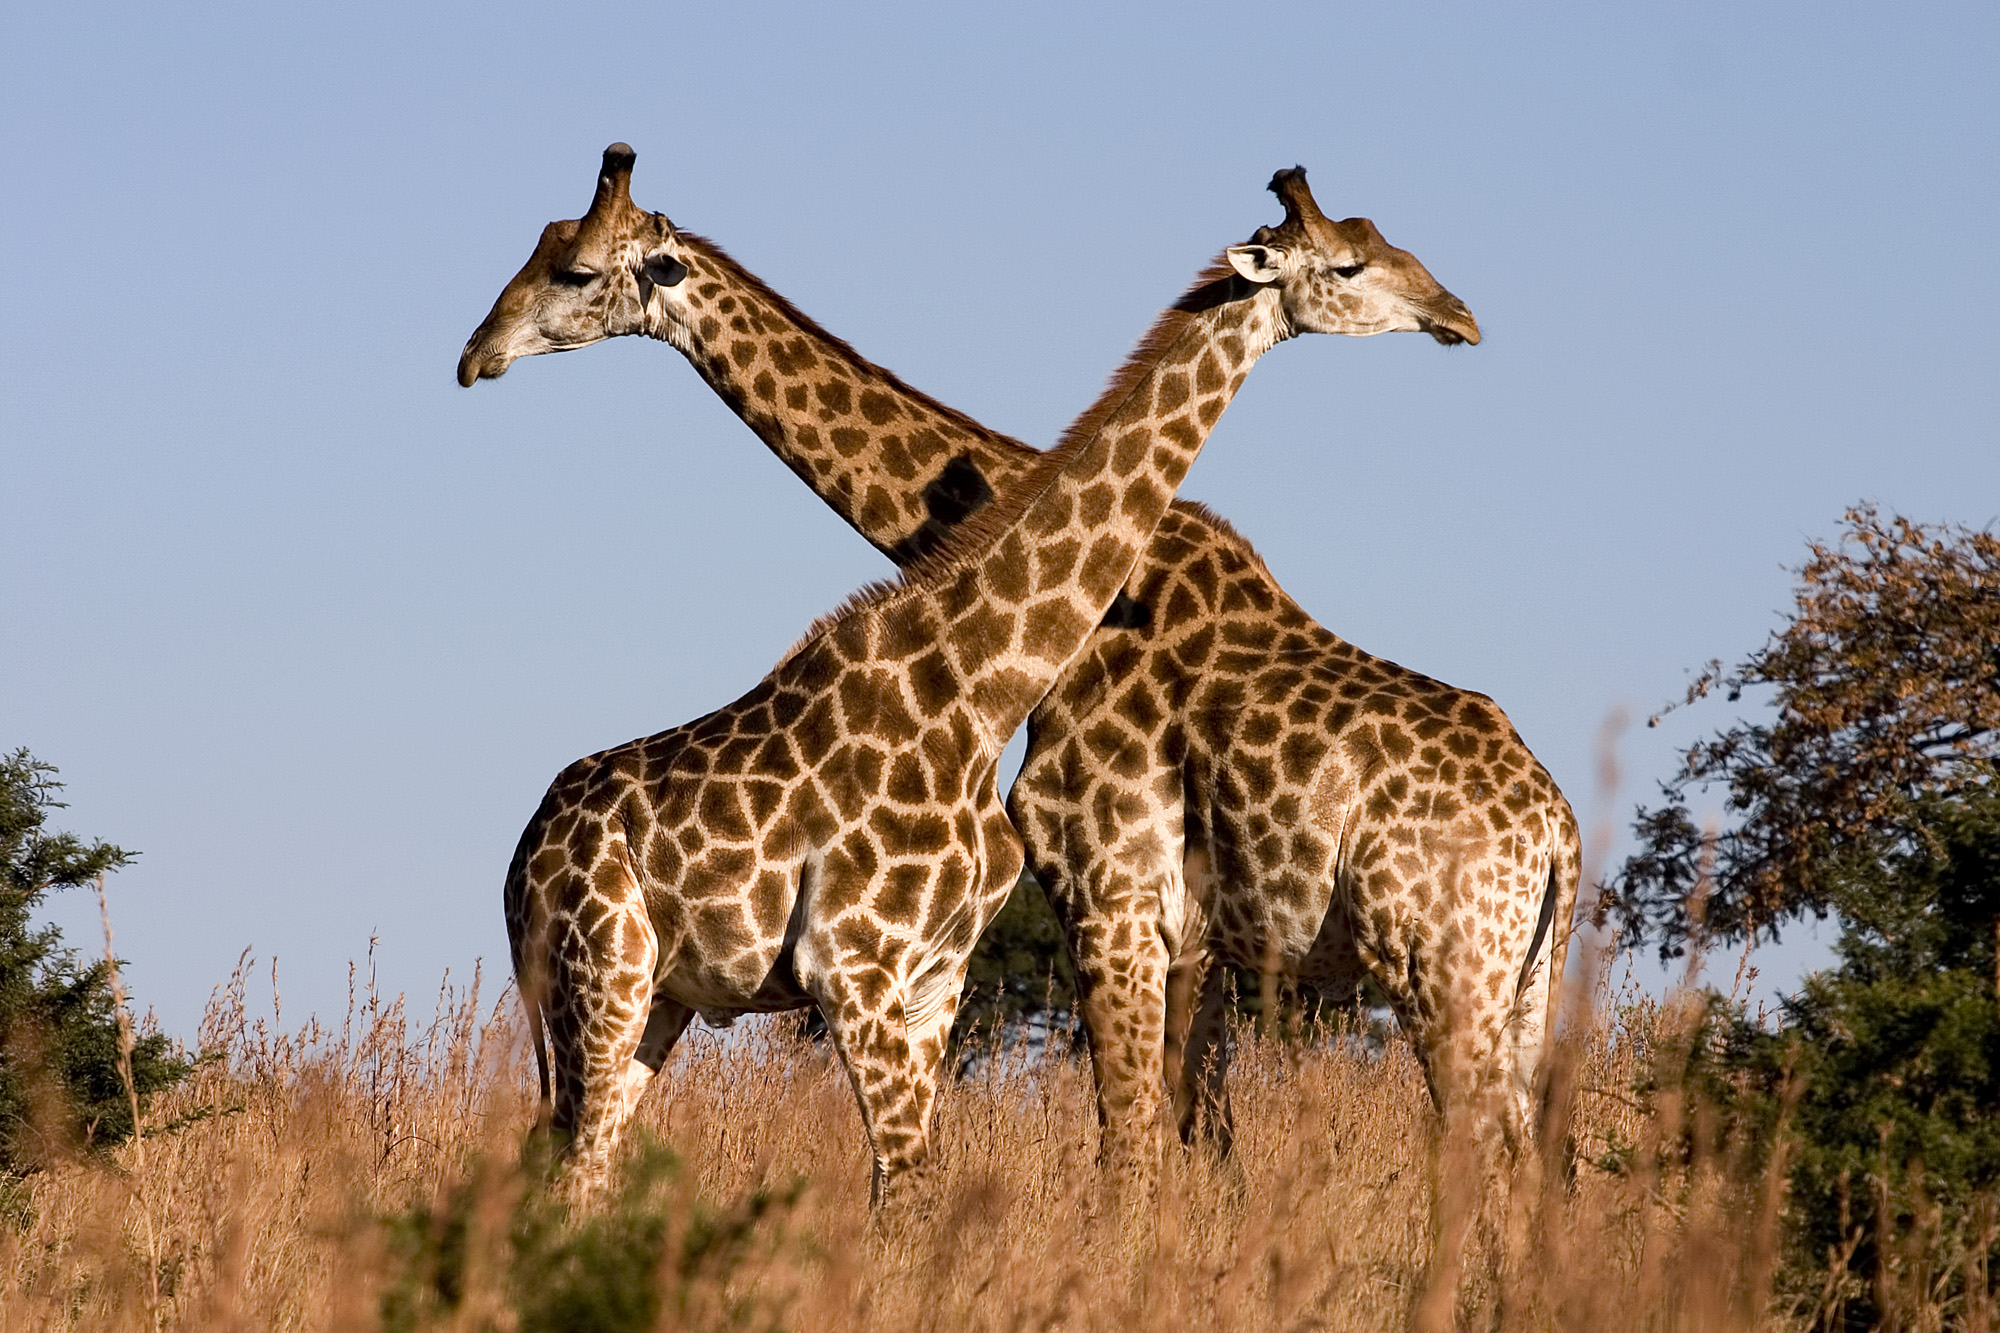 Giraffes In Namibia Fitted With GPS Technology